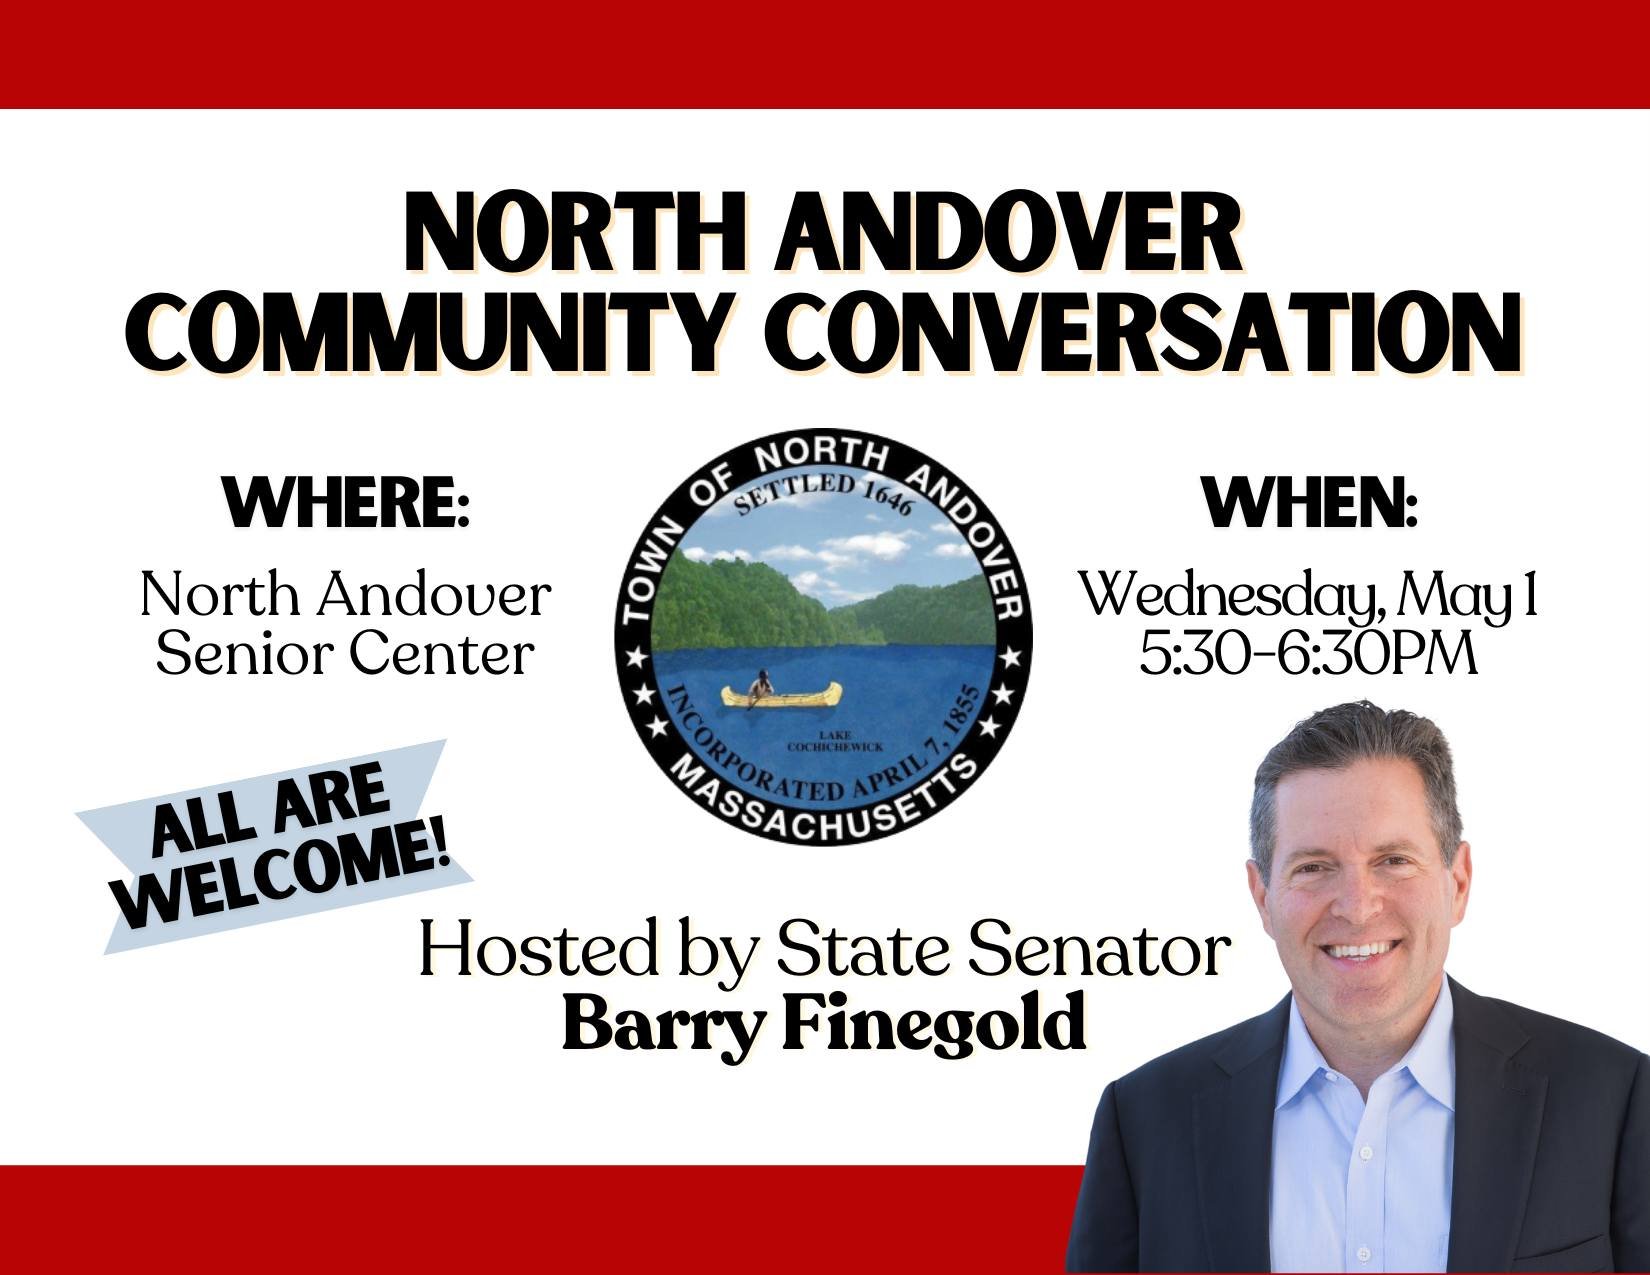 North Andover residents 🔔 Join me on Wednesday, May 1 at 5:30 for a Community Conversation! During this town hall style event, we will discuss local and state affairs, my legislative priorities, and issues that matter to you.

All are welcome at thi